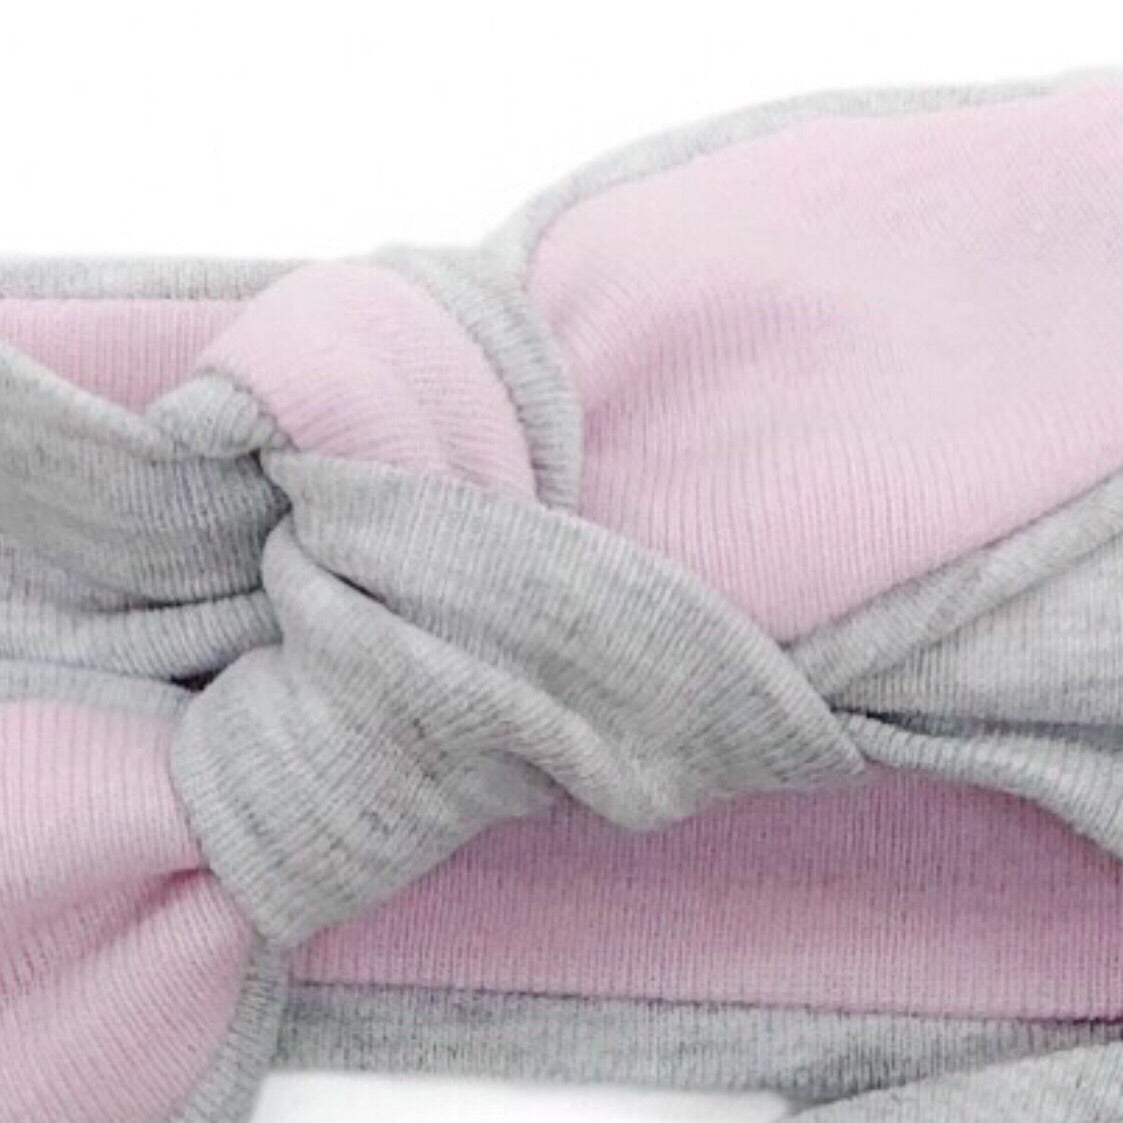 Baby & Toddler Knotted Hair Band/Bow - Grey and Baby Pink